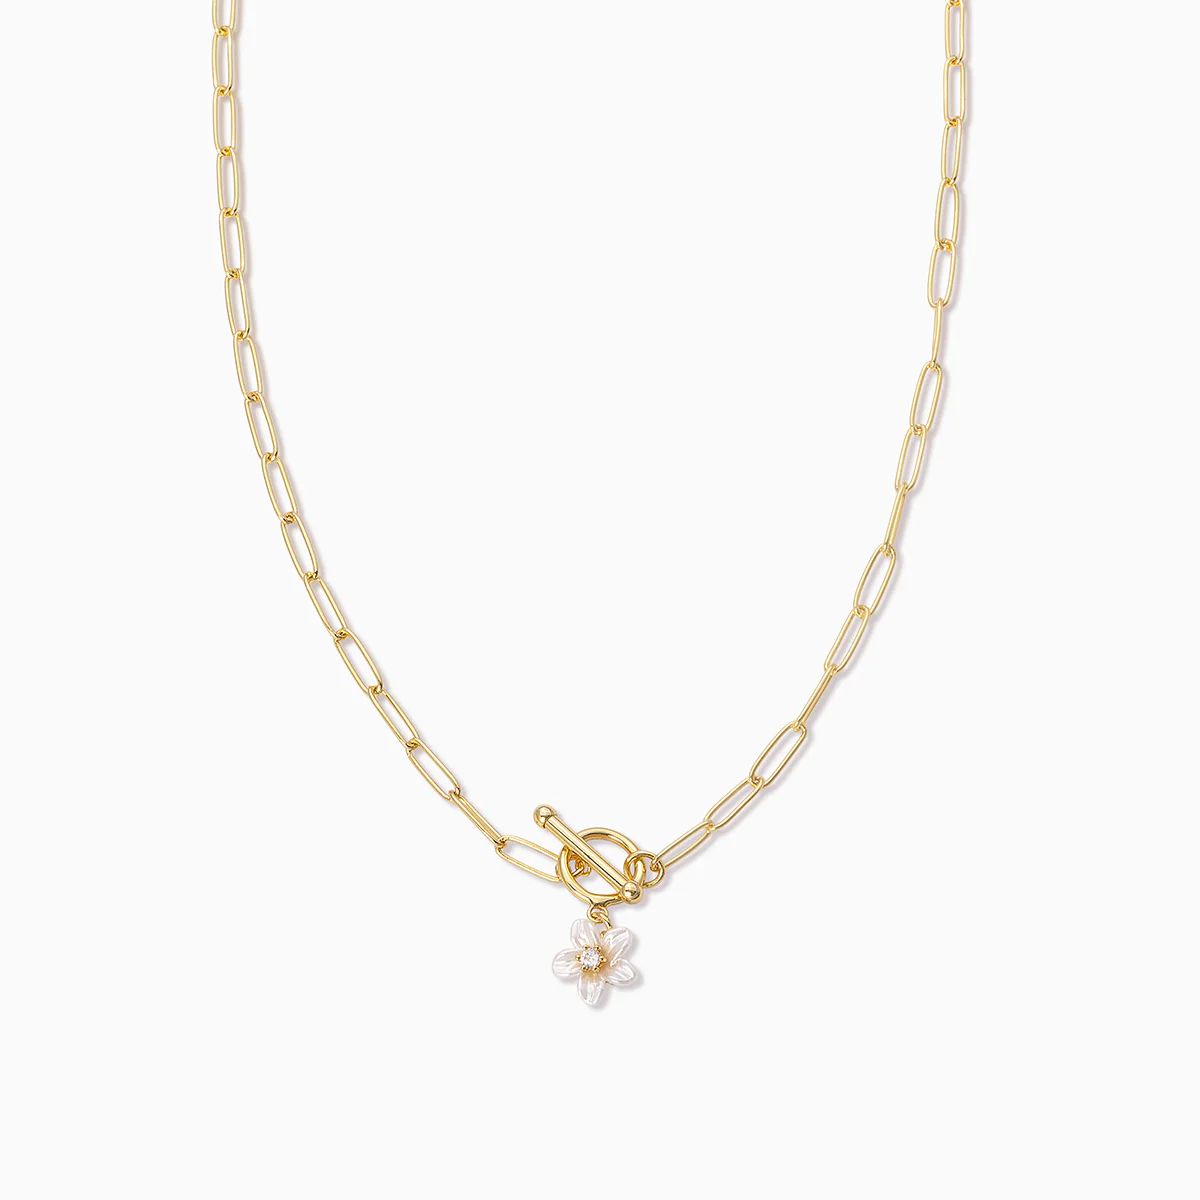 Picking Petals Chain and Pendant Necklace | Uncommon James